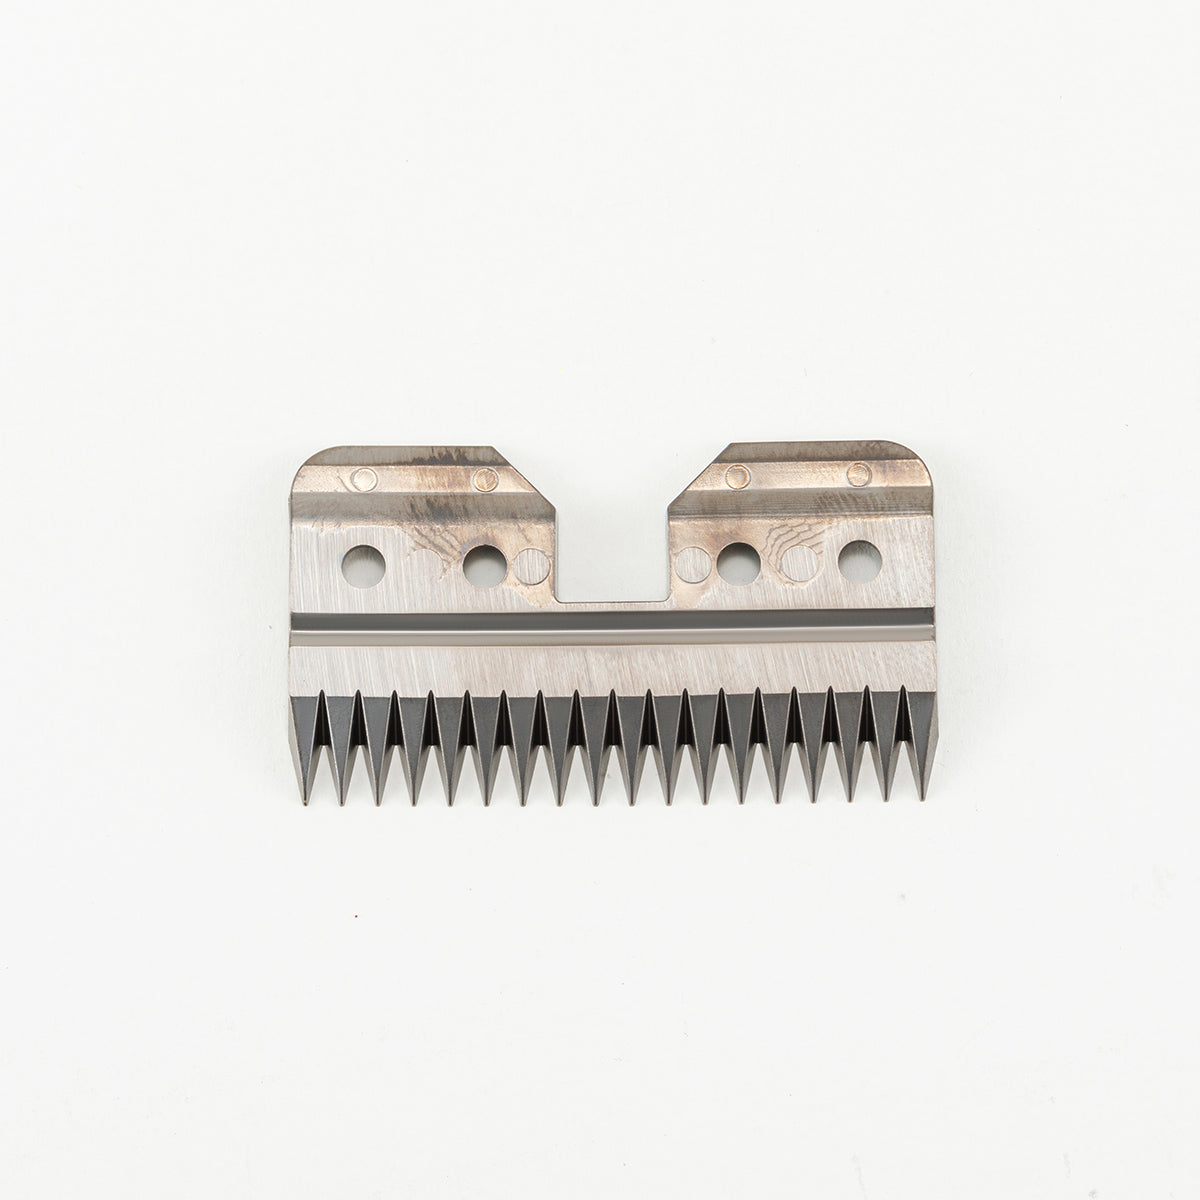 Clipper Blade Replacement Stainless Steel Material With 18 Deep Cut Teeth